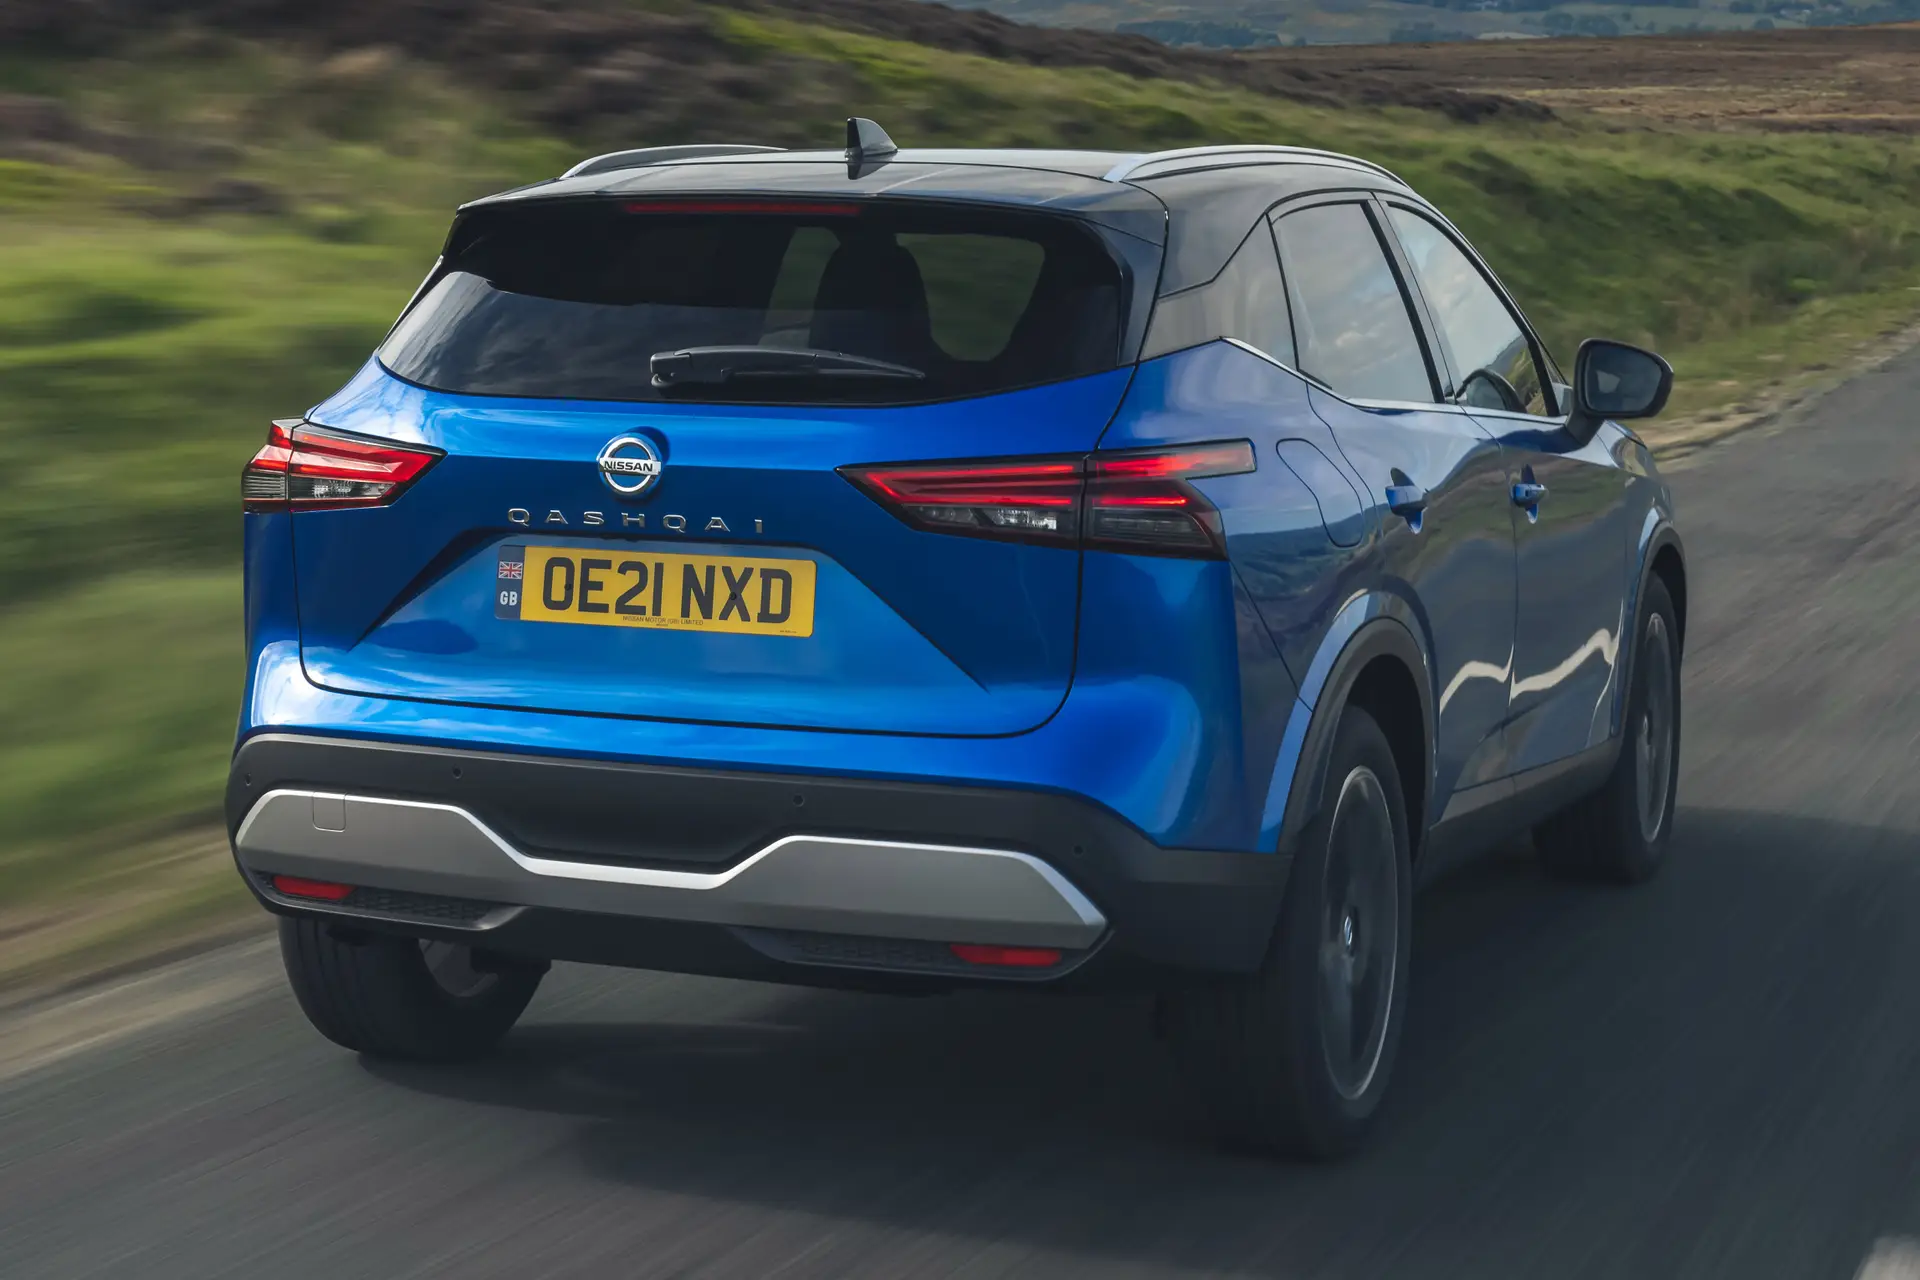 2022 Nissan Qashqai: All you need to know about it - Car News